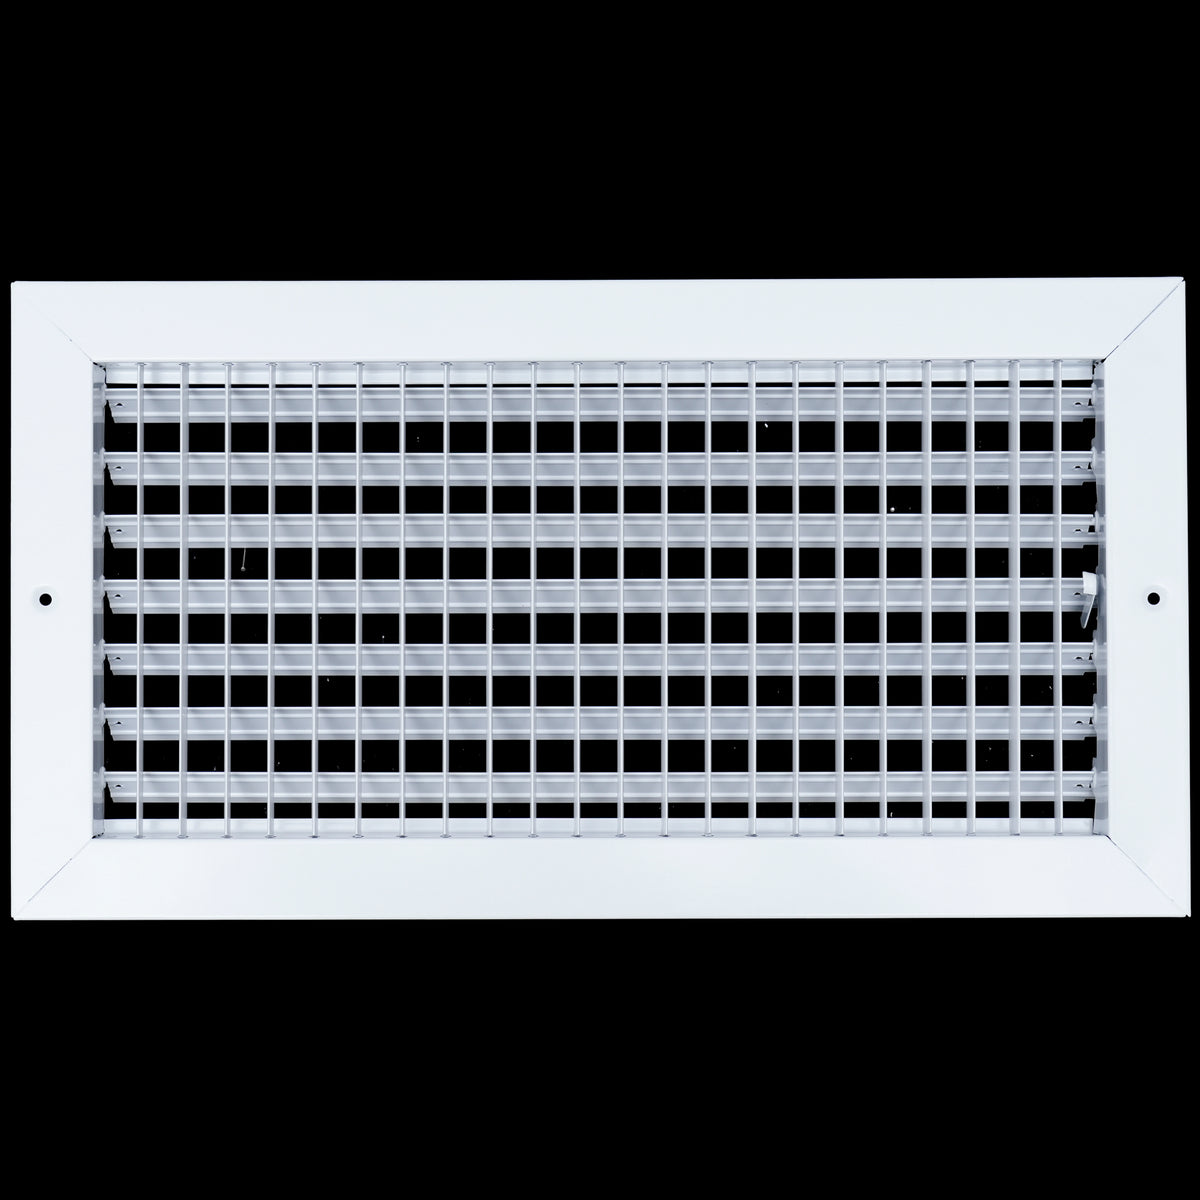 airgrilles 16"w x 8"h steel adjustable air supply grille   register vent cover grill for sidewall and ceiling   white   outer dimensions: 17.75"w x 9.75"h for 16x8 duct opening hnd-adj-wh-16x8  - 1